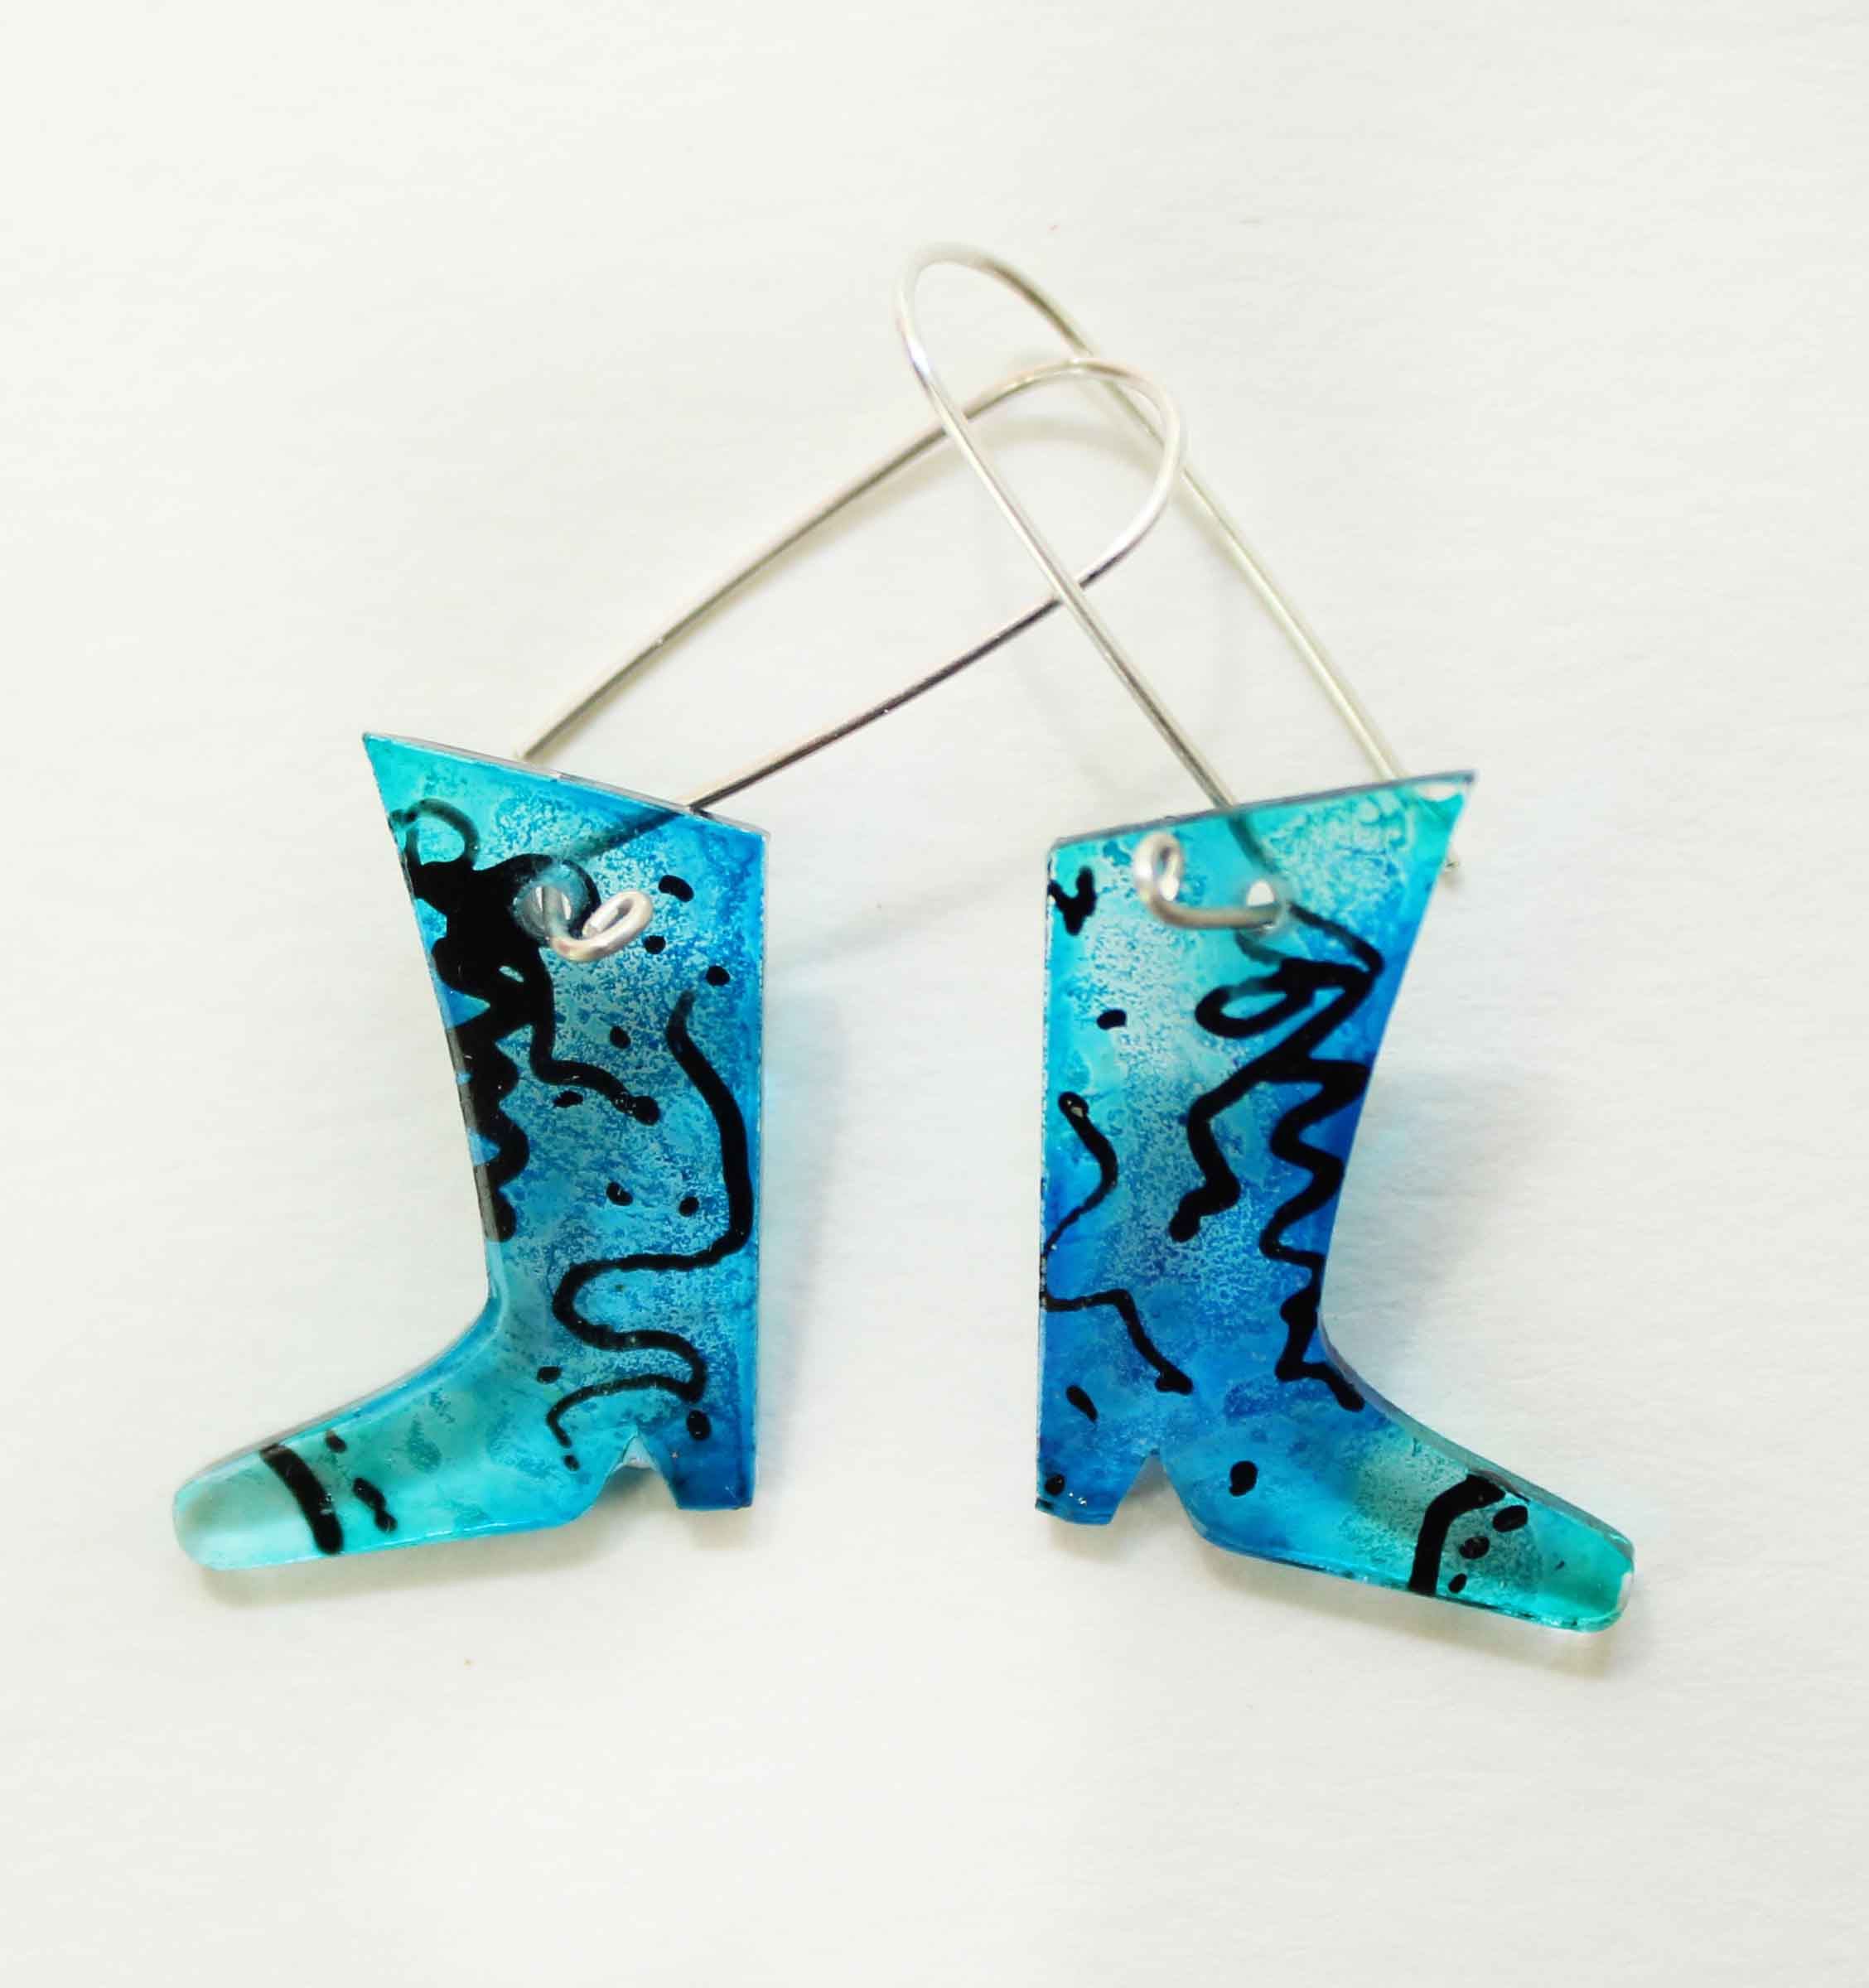 Neely Goniodsky Blue Boots, 2021 Acrylic, resin and sterling silver 1 ½” long